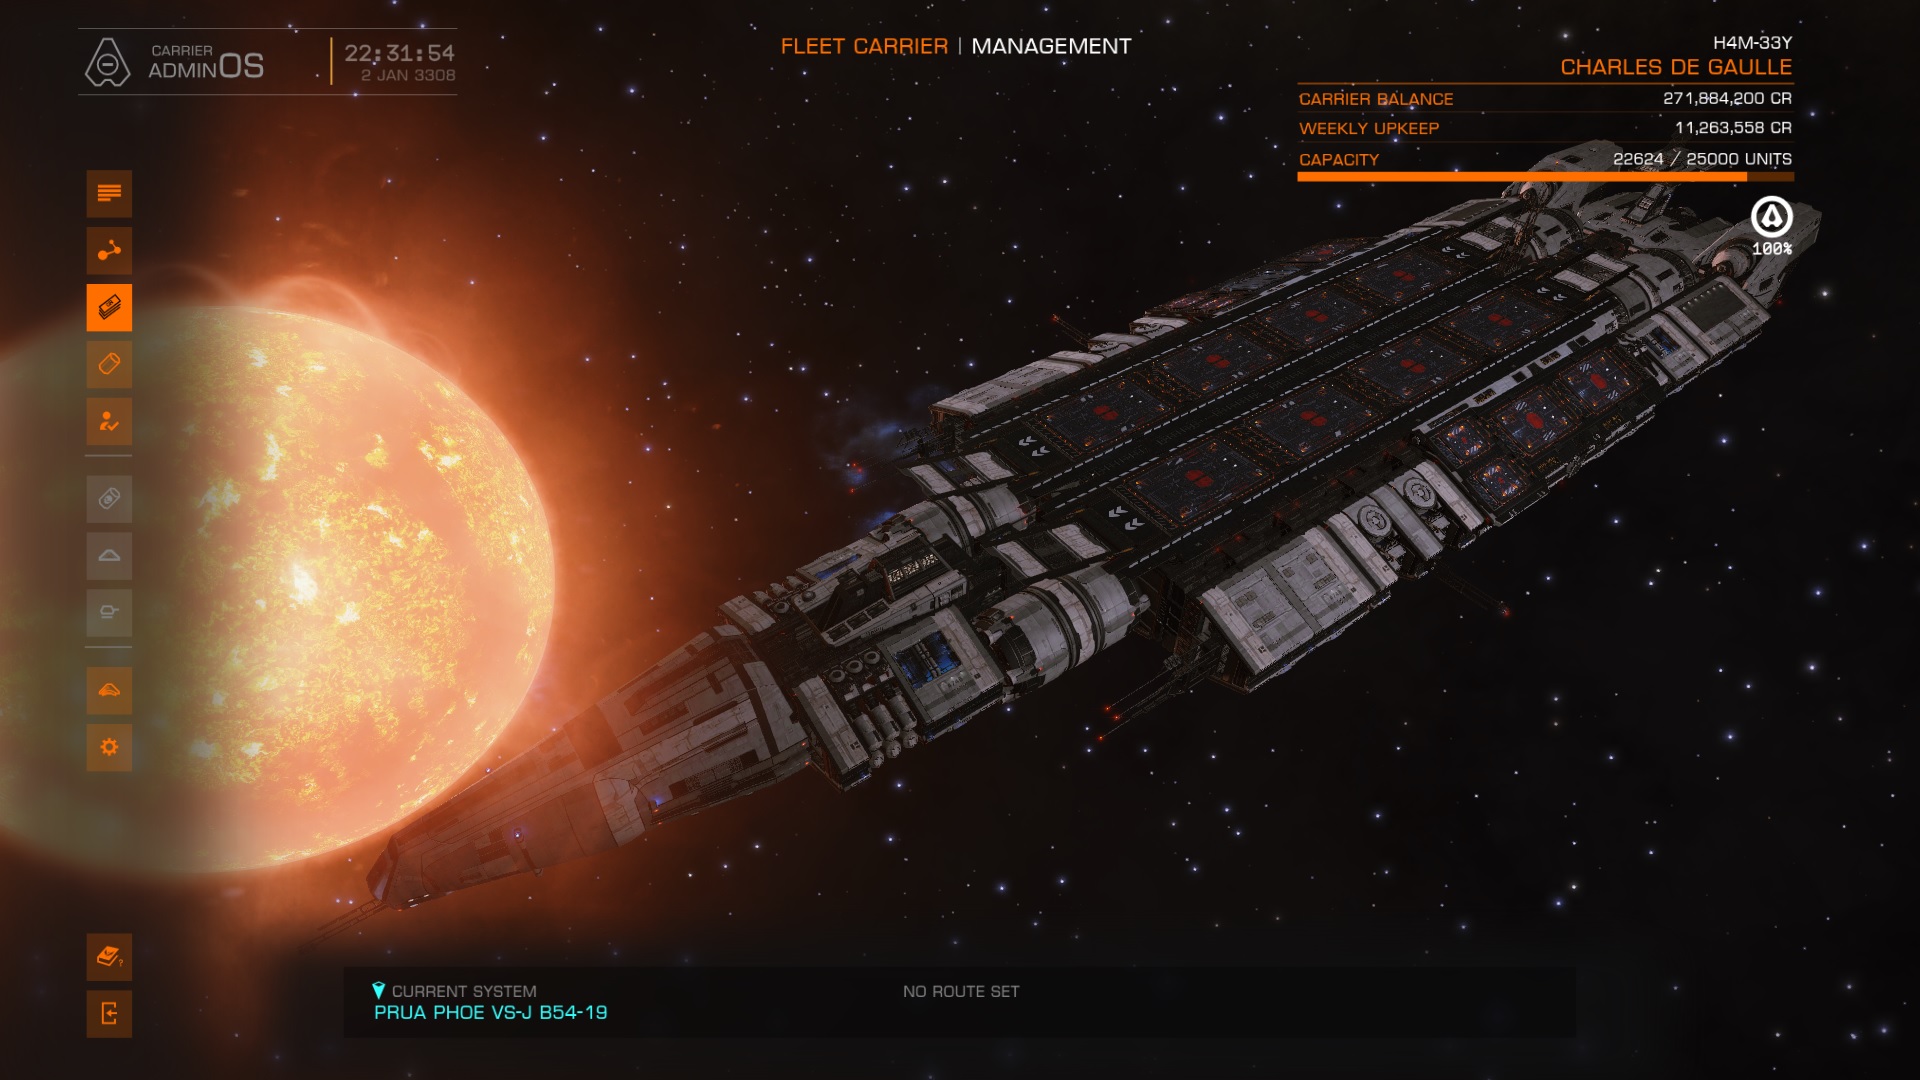 Elite Dangerous Fleet Carriers Total Running Cost Will Be Reduced by 85%